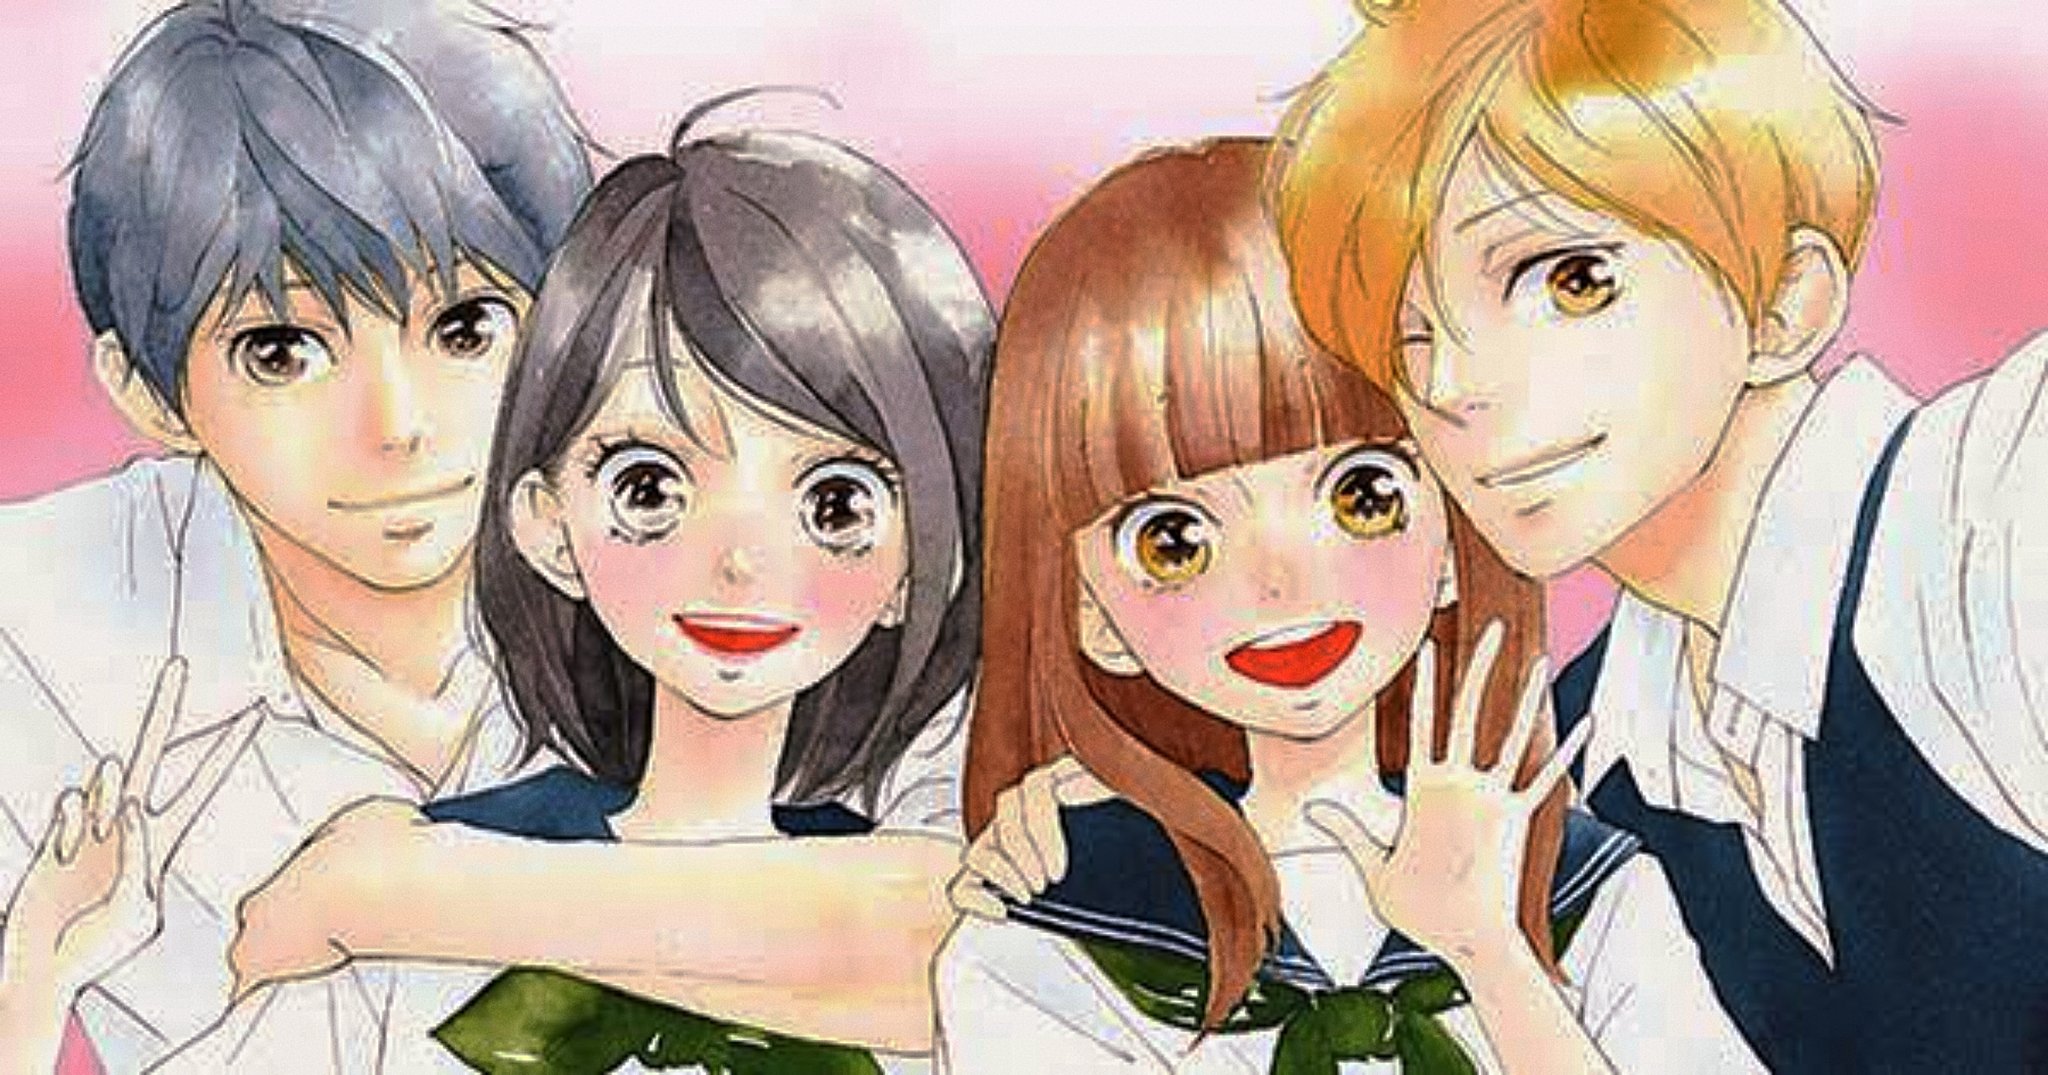 Yuki  Netflix's YYH, OP S2 and AIB S3 on X: AO HARU RIDE Live-Action  Adaptation Casts in 2014 2023  / X